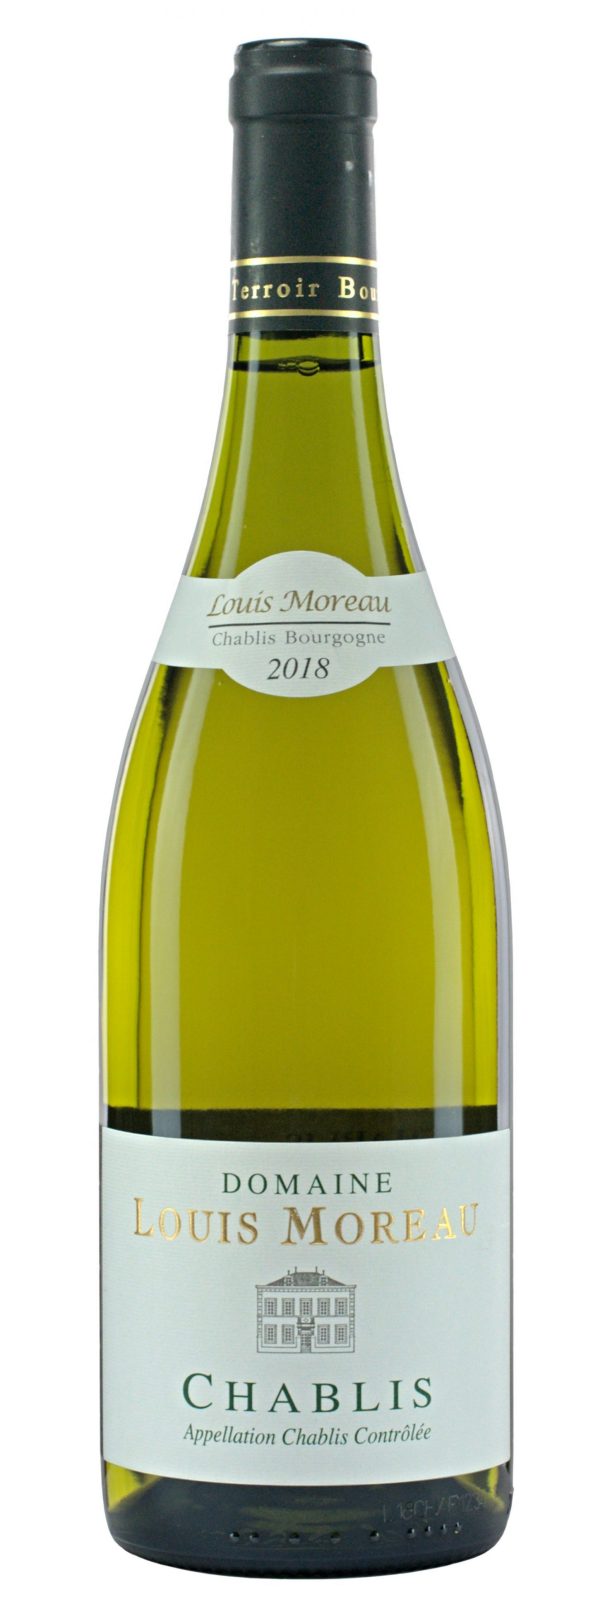 ALL THINGS DRINKS - Louis Moreau - Chablis - French White Wine